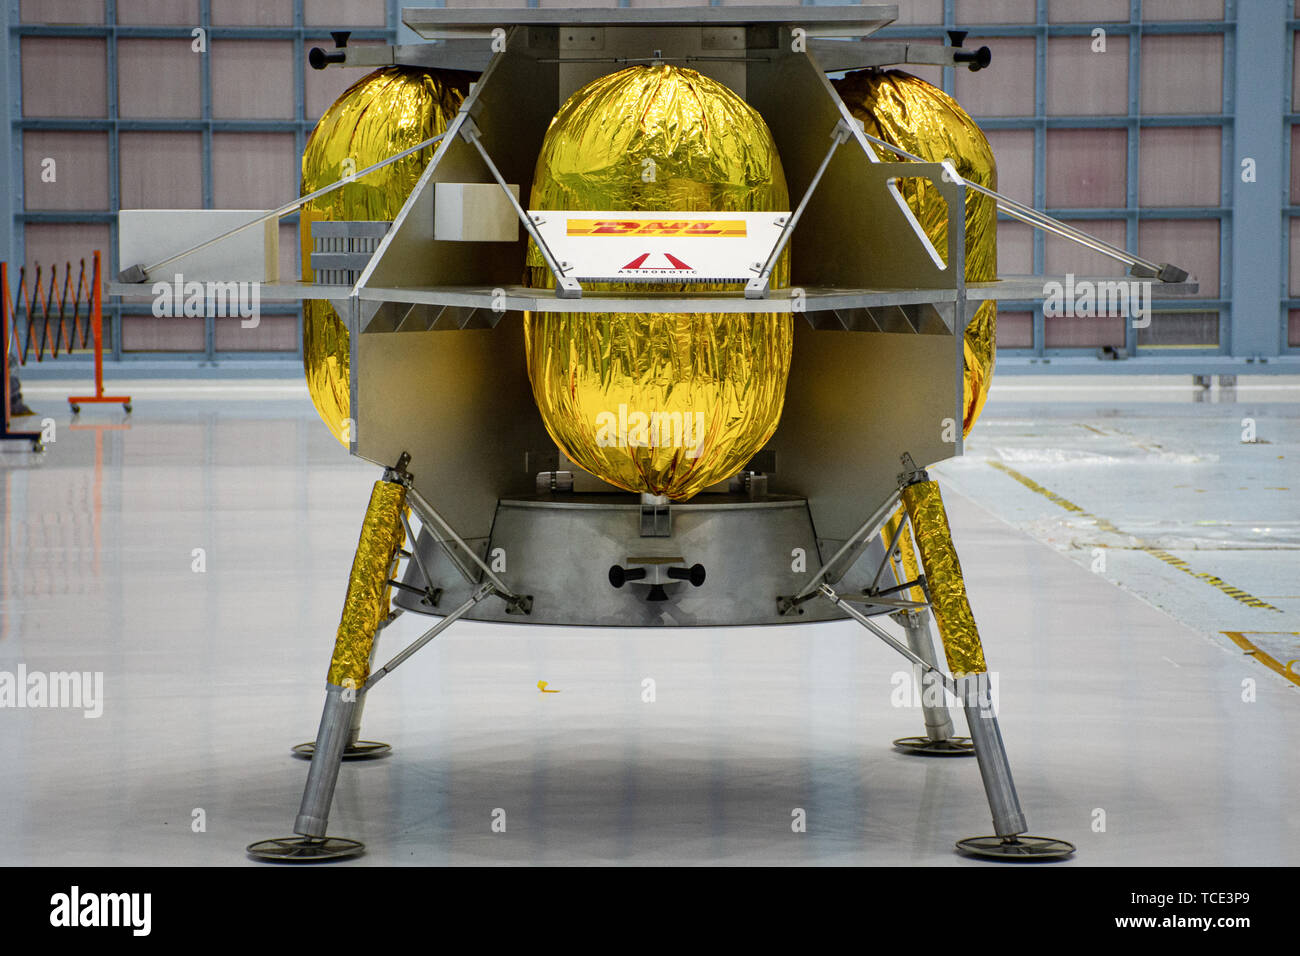 The Astrobotic Peregrine lunar lander, designed for the NASA Commercial Lunar Payload Services Artemis program on display at the Goddard Space Flight Center May 31, 2019 in Greenbelt, Maryland. The lander was one of the three commercial providers selected by NASA to carry a payload to the lunar surface by 2014. Stock Photo